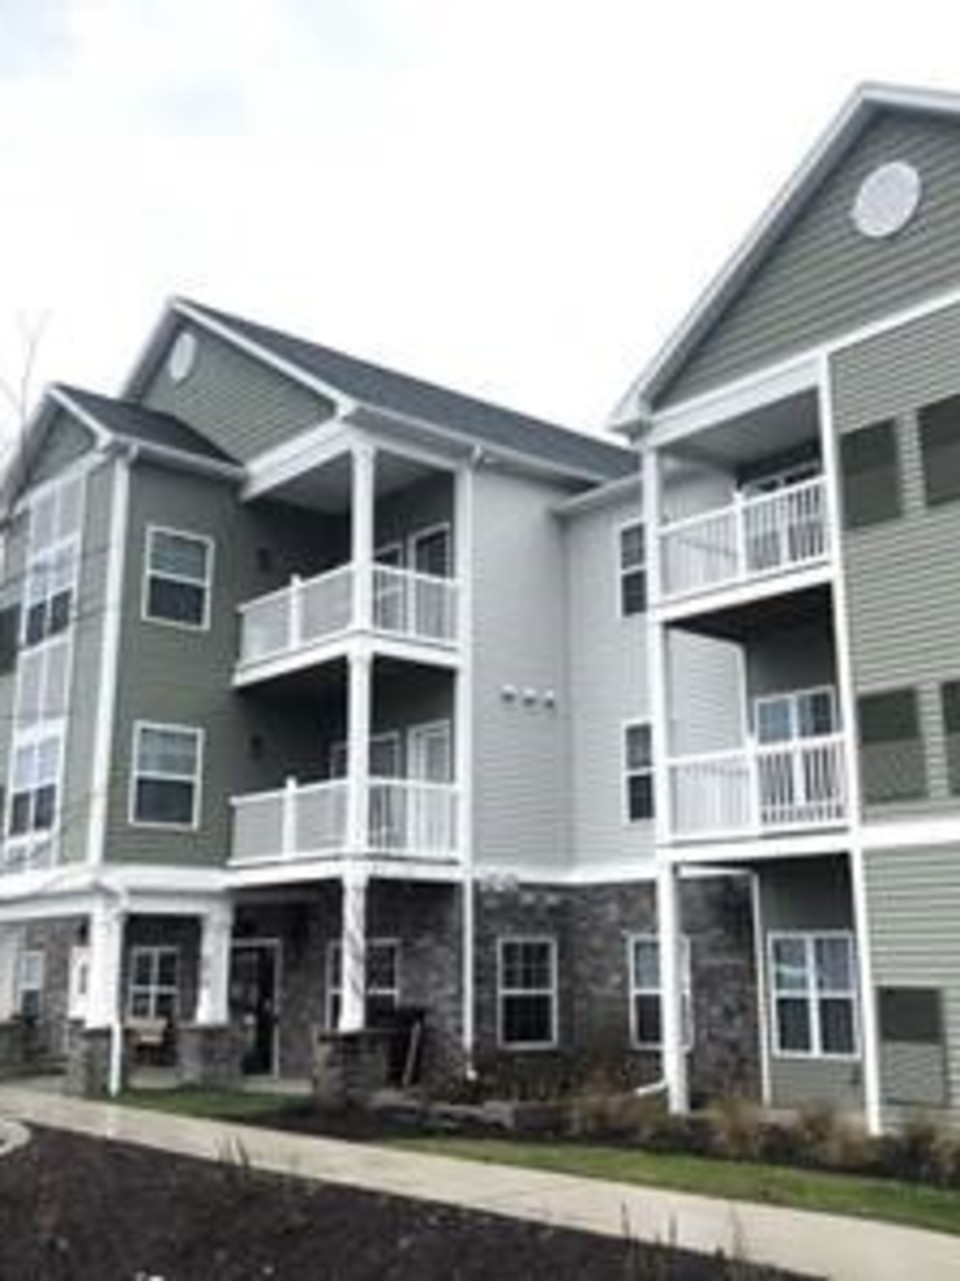 New Apartment Complex In Henrietta Supports People With